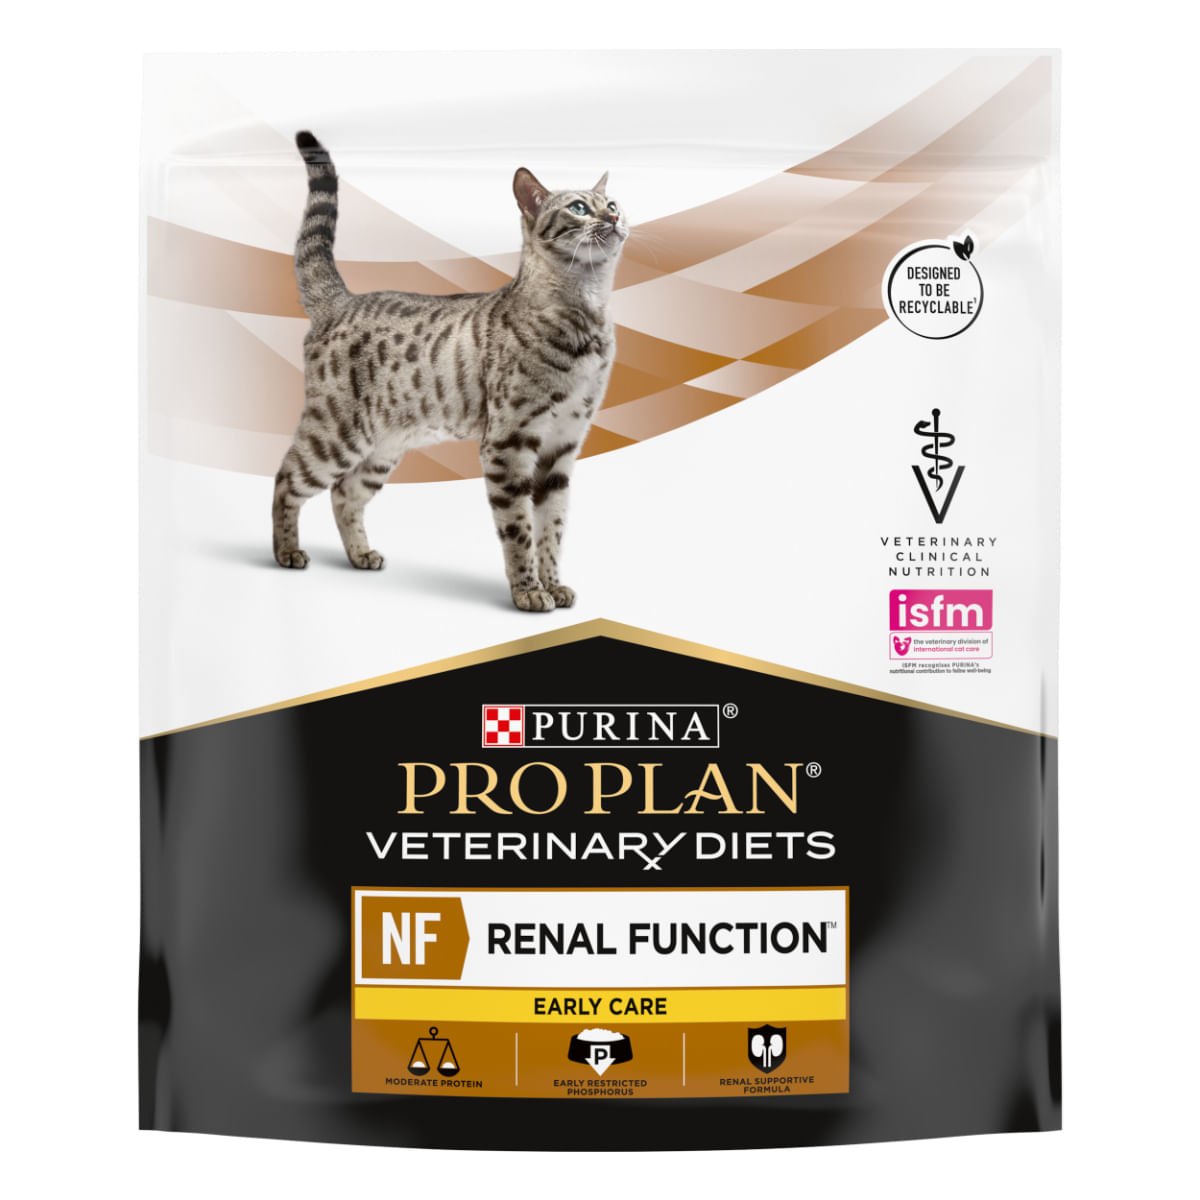 Purina Pro Plan Veterinary Diets Nf Renal Function Early Care Gatto 350G